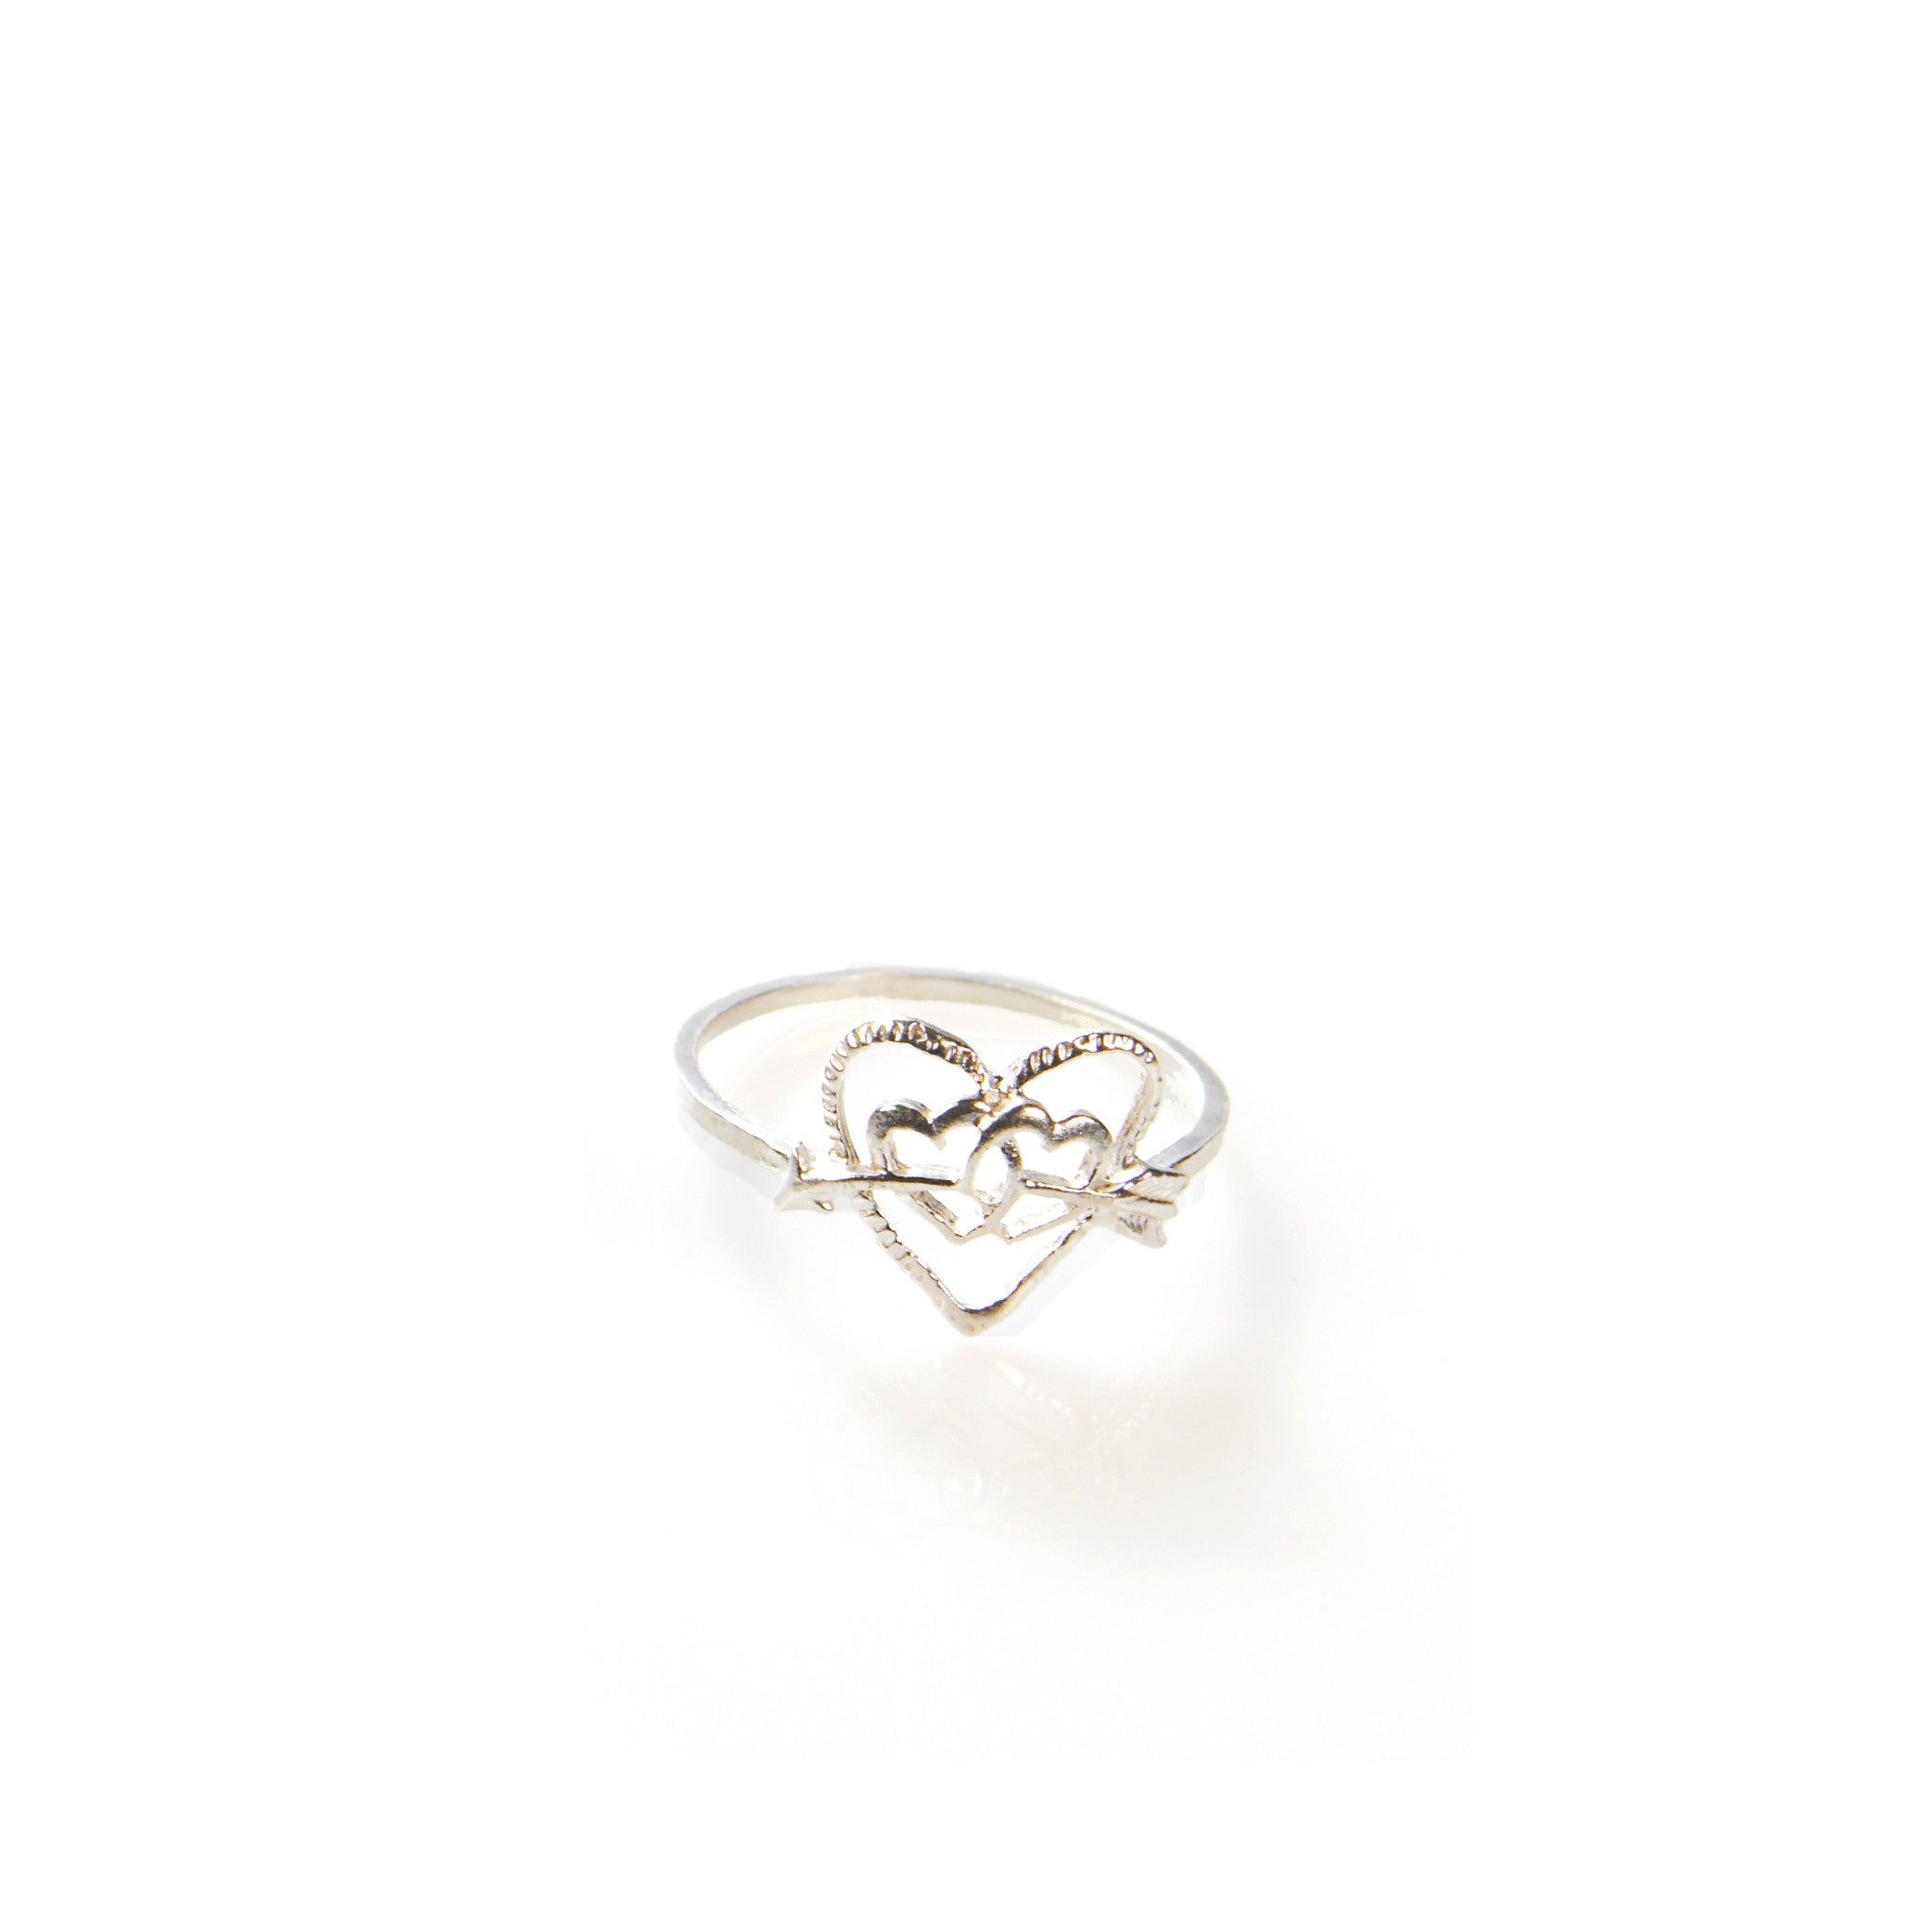 Silver heart and arrows ring